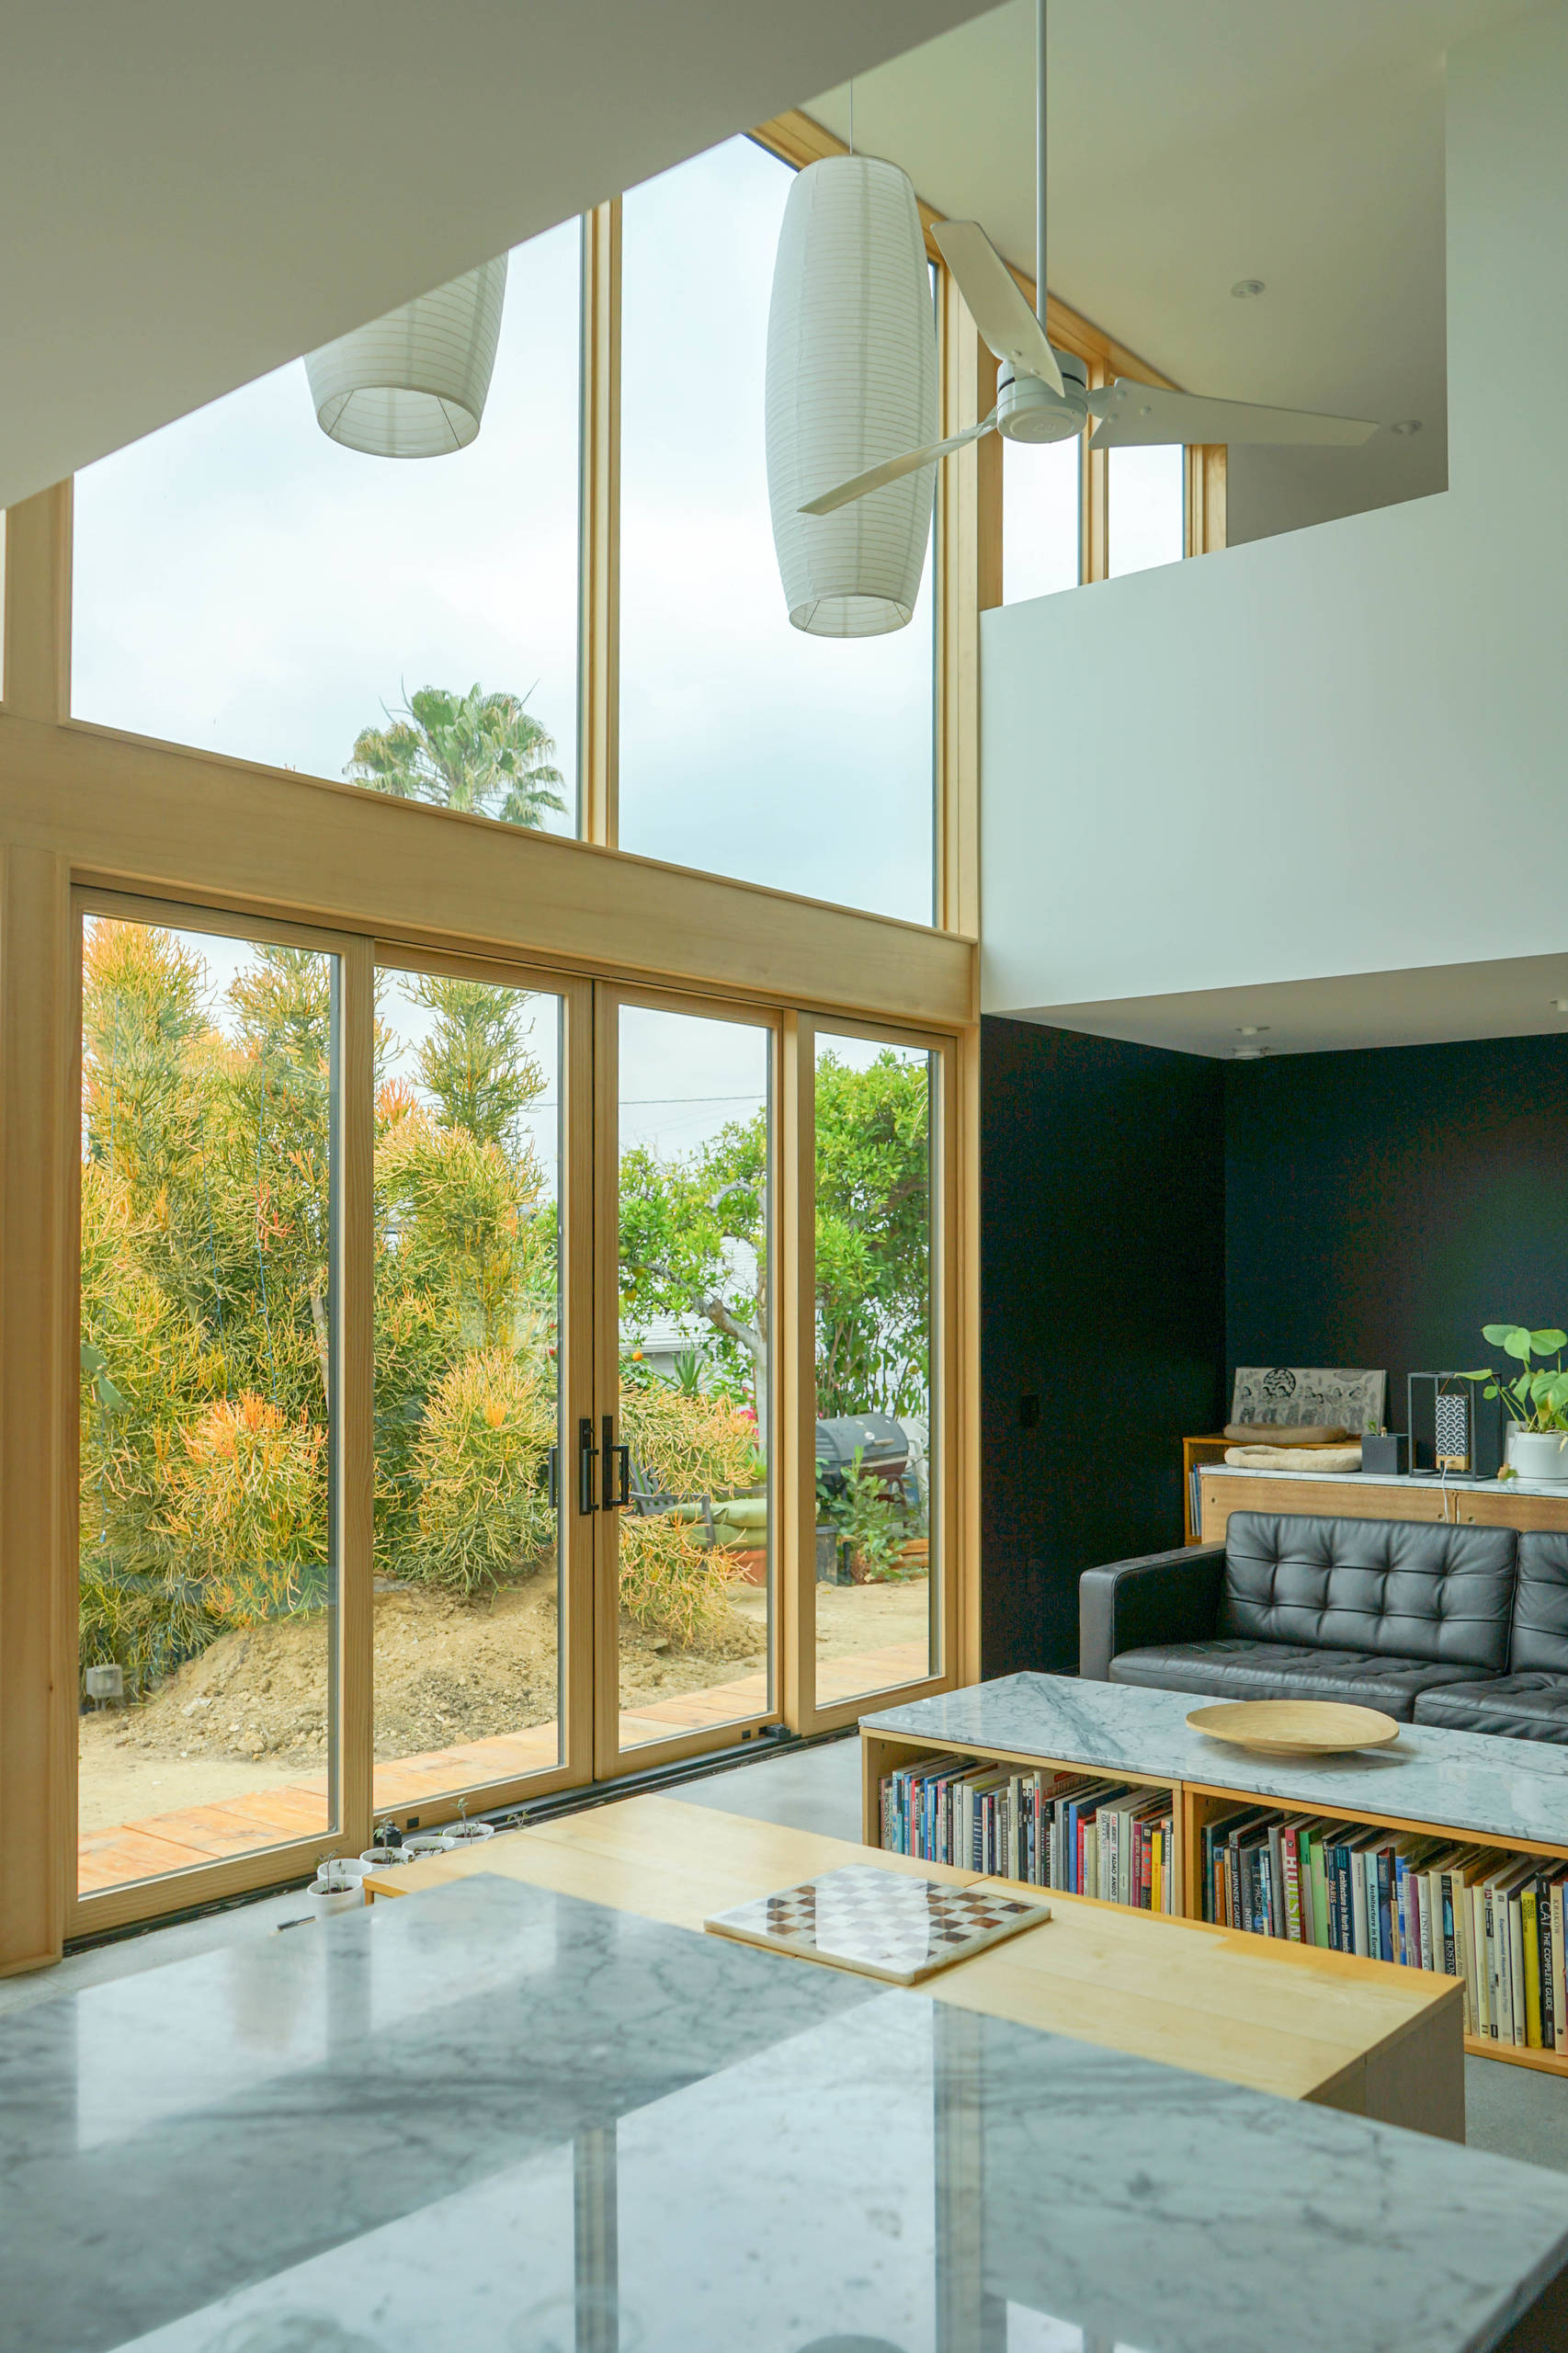 This ADU's Great Room contains expansive windows and doors which open and with an open second floor it provides natural light to fill the room.